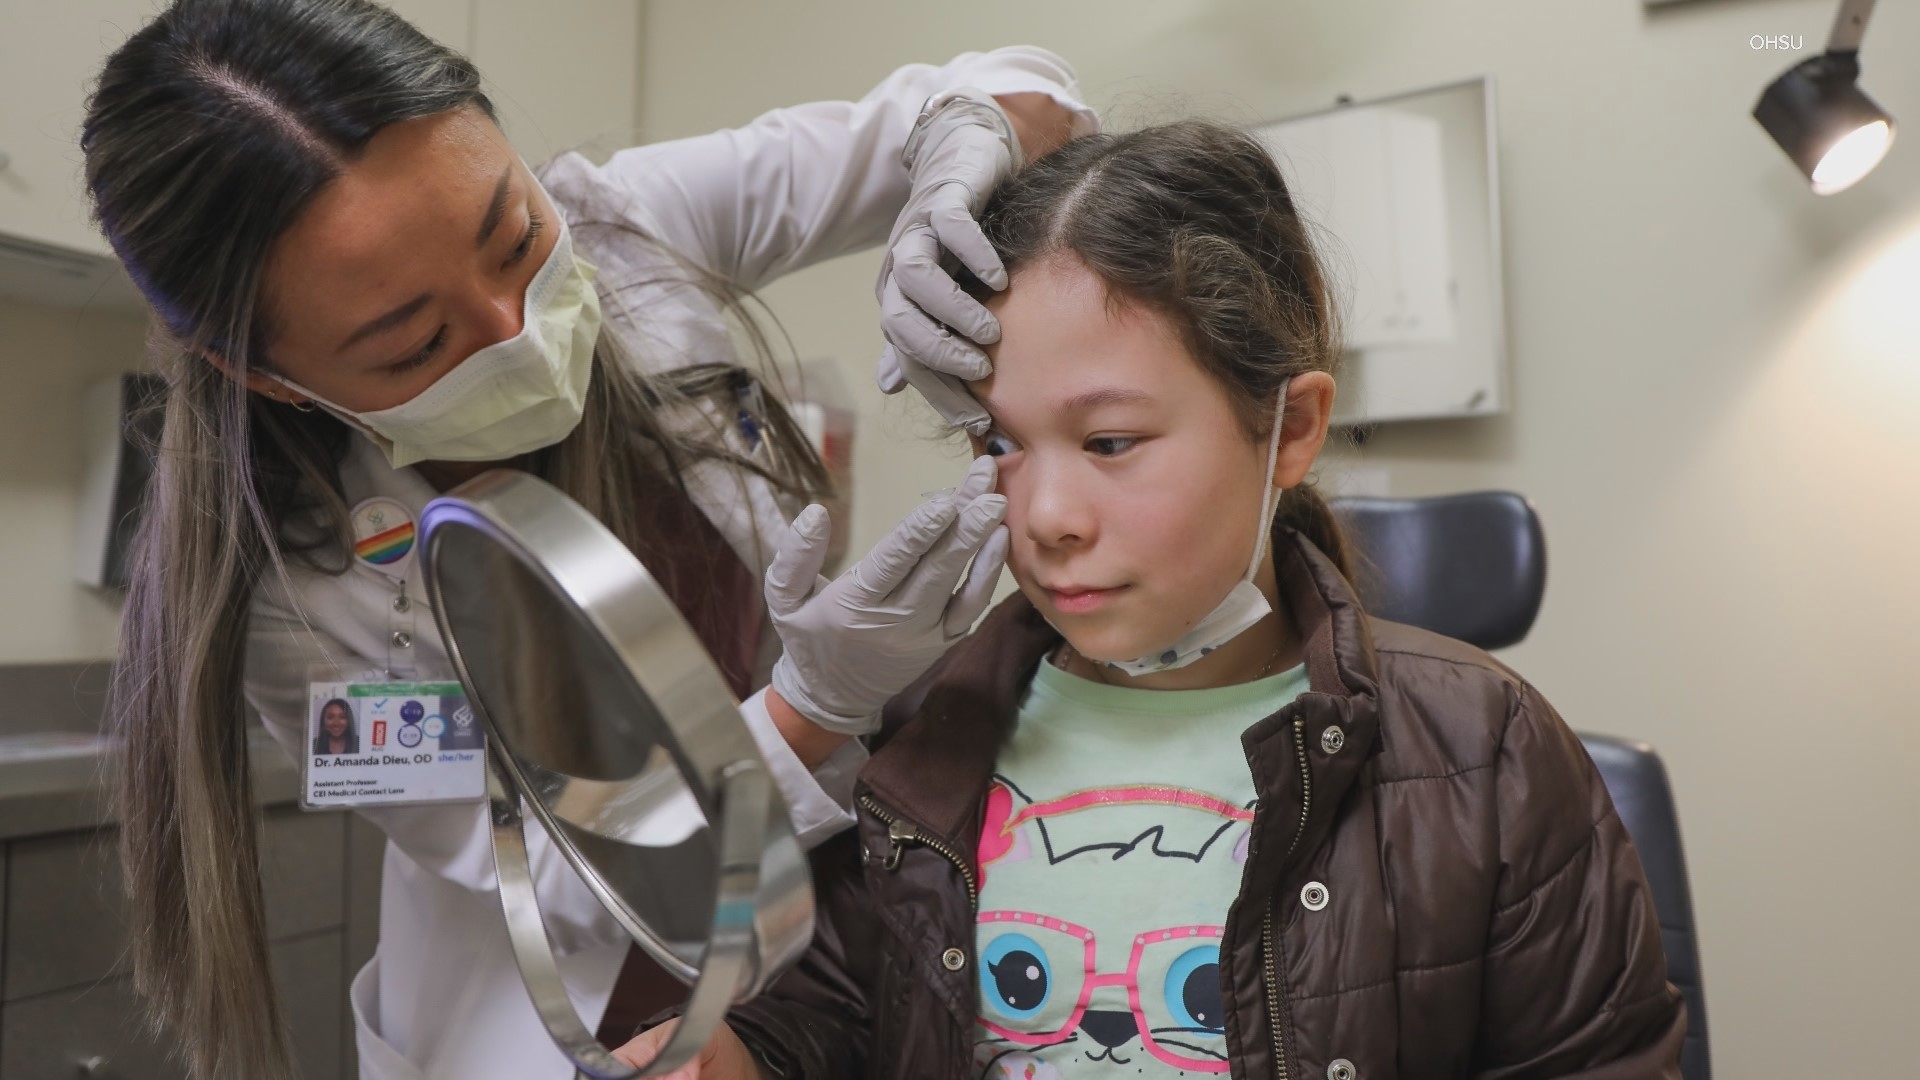 A 10-year-old girl received contact lenses through Oregon Health and Science University's Myopia Management Program.